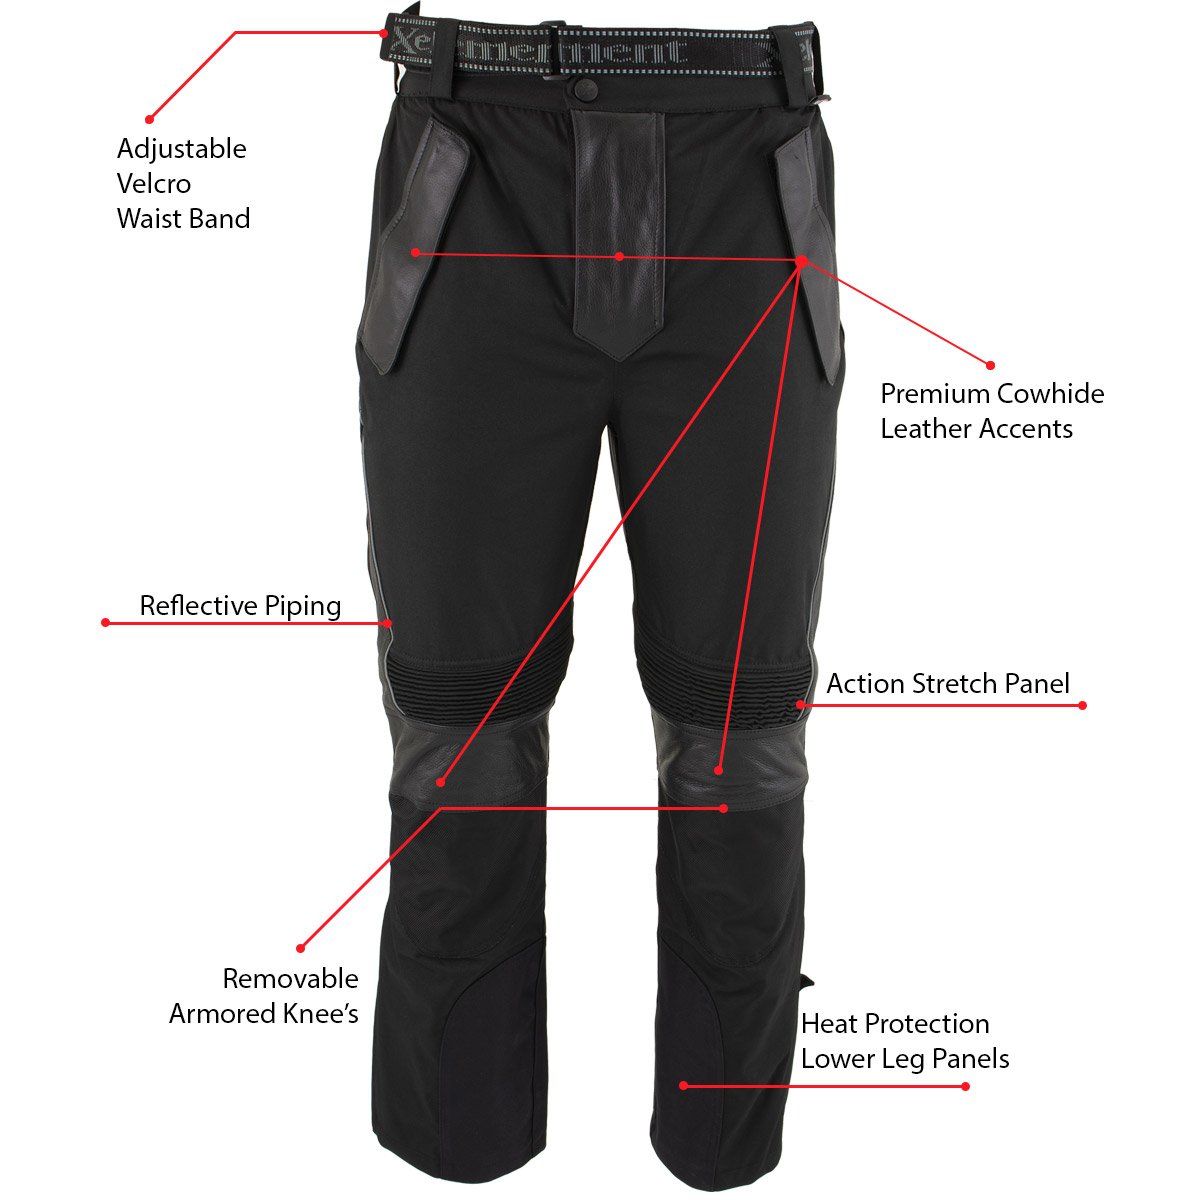 Motorcycle Riding Pants with Reflective Tape, Adjustable Size, Waterproof